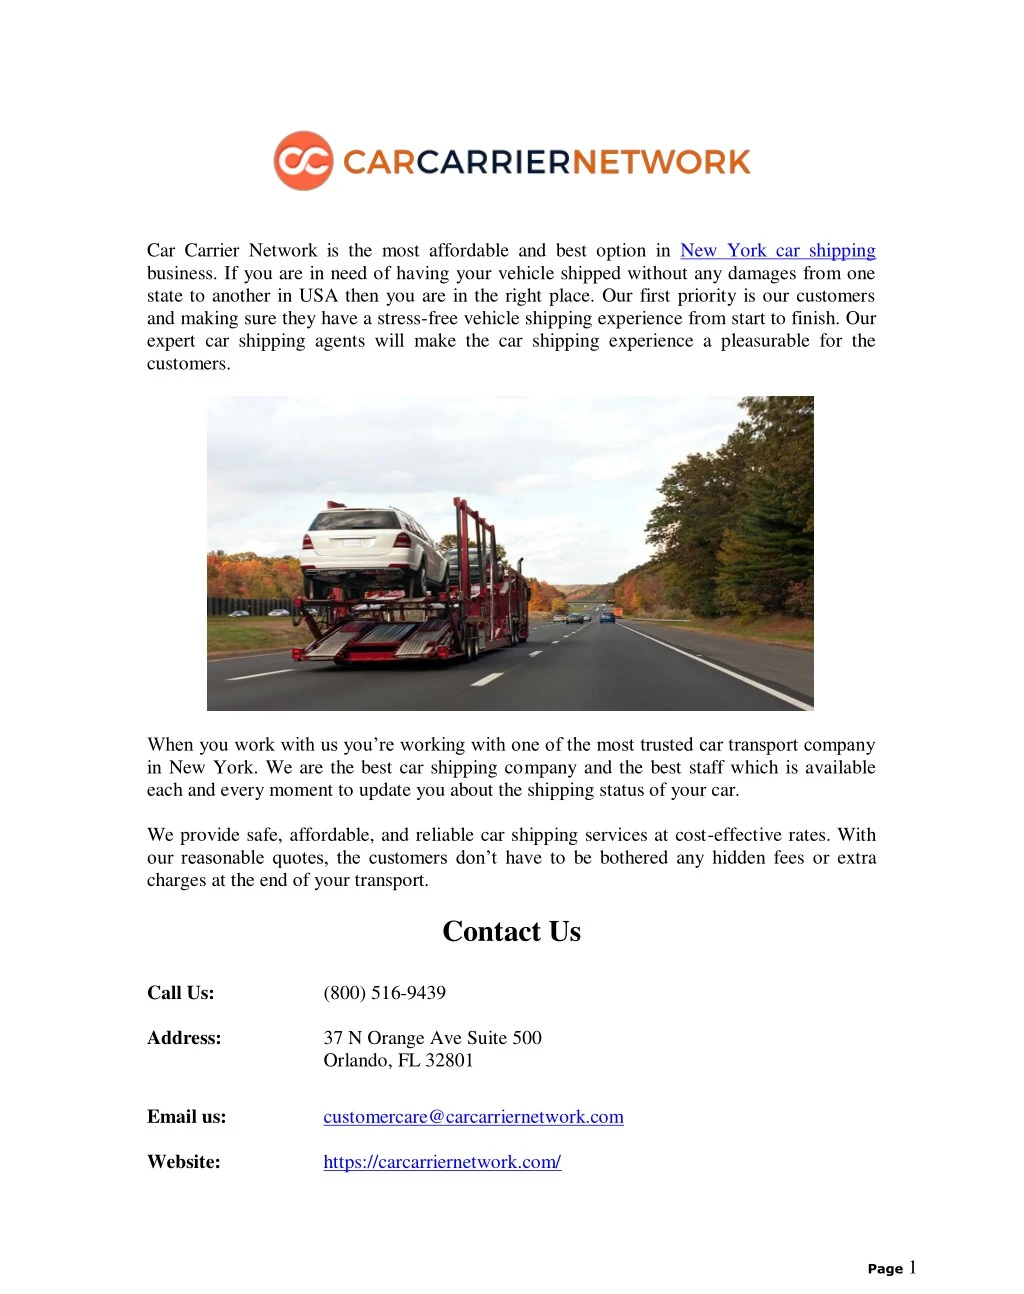 car carrier network is the most affordable